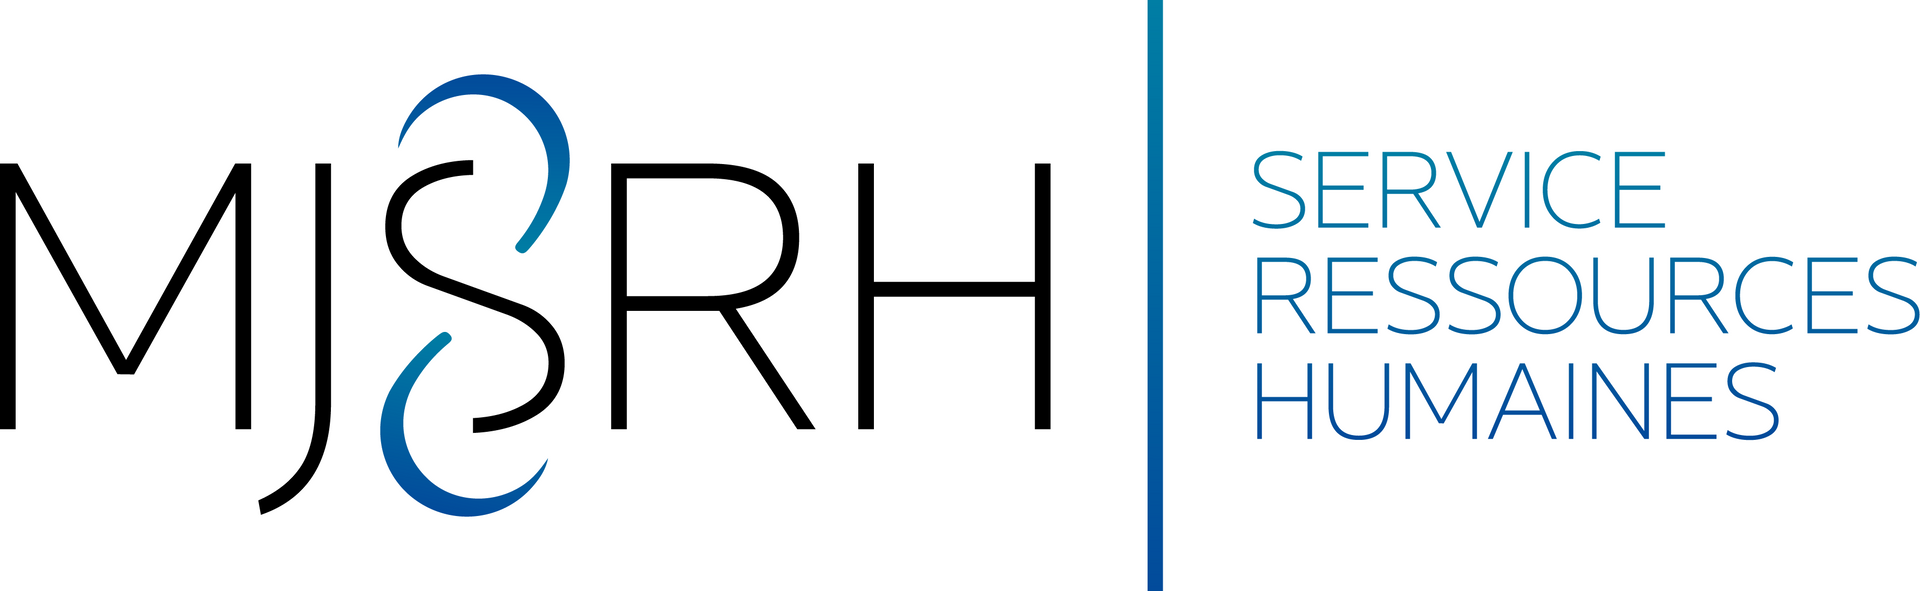 A logo for misrh service ressources humaines